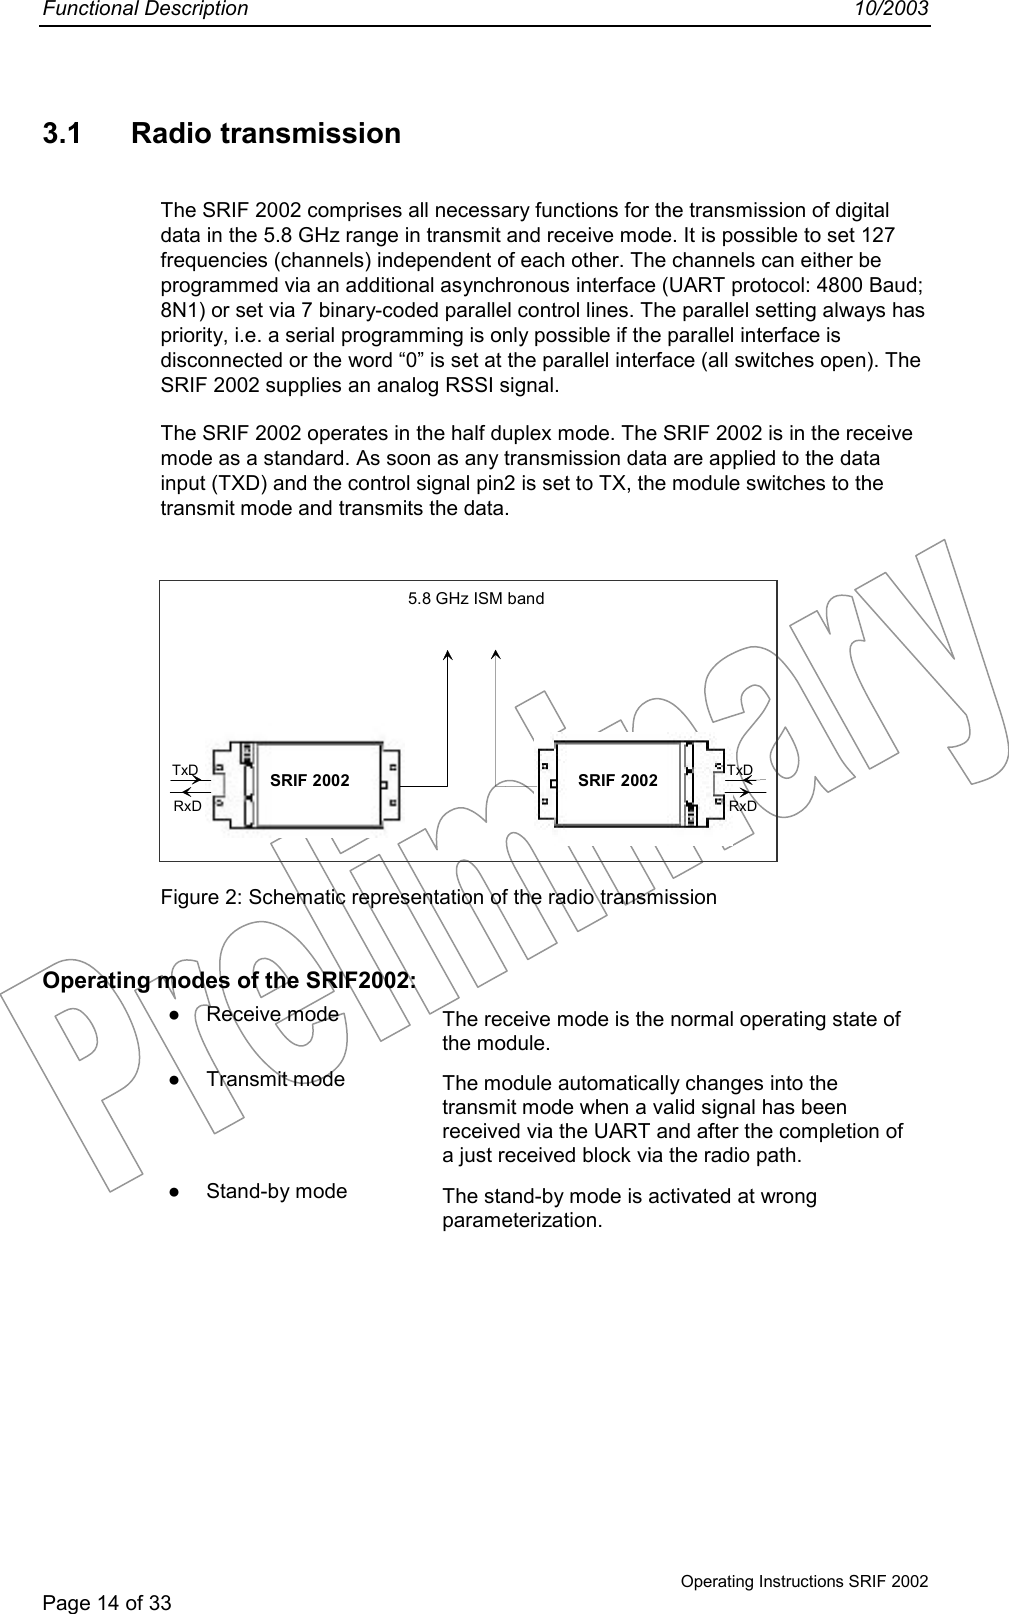 Functional Description 10/2003Operating Instructions SRIF 2002Page 14 of 333.1 Radio transmissionThe SRIF 2002 comprises all necessary functions for the transmission of digitaldata in the 5.8 GHz range in transmit and receive mode. It is possible to set 127frequencies (channels) independent of each other. The channels can either beprogrammed via an additional asynchronous interface (UART protocol: 4800 Baud;8N1) or set via 7 binary-coded parallel control lines. The parallel setting always haspriority, i.e. a serial programming is only possible if the parallel interface isdisconnected or the word “0” is set at the parallel interface (all switches open). TheSRIF 2002 supplies an analog RSSI signal.The SRIF 2002 operates in the half duplex mode. The SRIF 2002 is in the receivemode as a standard. As soon as any transmission data are applied to the datainput (TXD) and the control signal pin2 is set to TX, the module switches to thetransmit mode and transmits the data.Figure 2: Schematic representation of the radio transmissionOperating modes of the SRIF2002:● Receive mode The receive mode is the normal operating state ofthe module.● Transmit mode The module automatically changes into thetransmit mode when a valid signal has beenreceived via the UART and after the completion ofa just received block via the radio path.● Stand-by mode The stand-by mode is activated at wrongparameterization.TxDRxDSRIF 2002 SRIF 2002 TxDRxD5.8 GHz ISM band